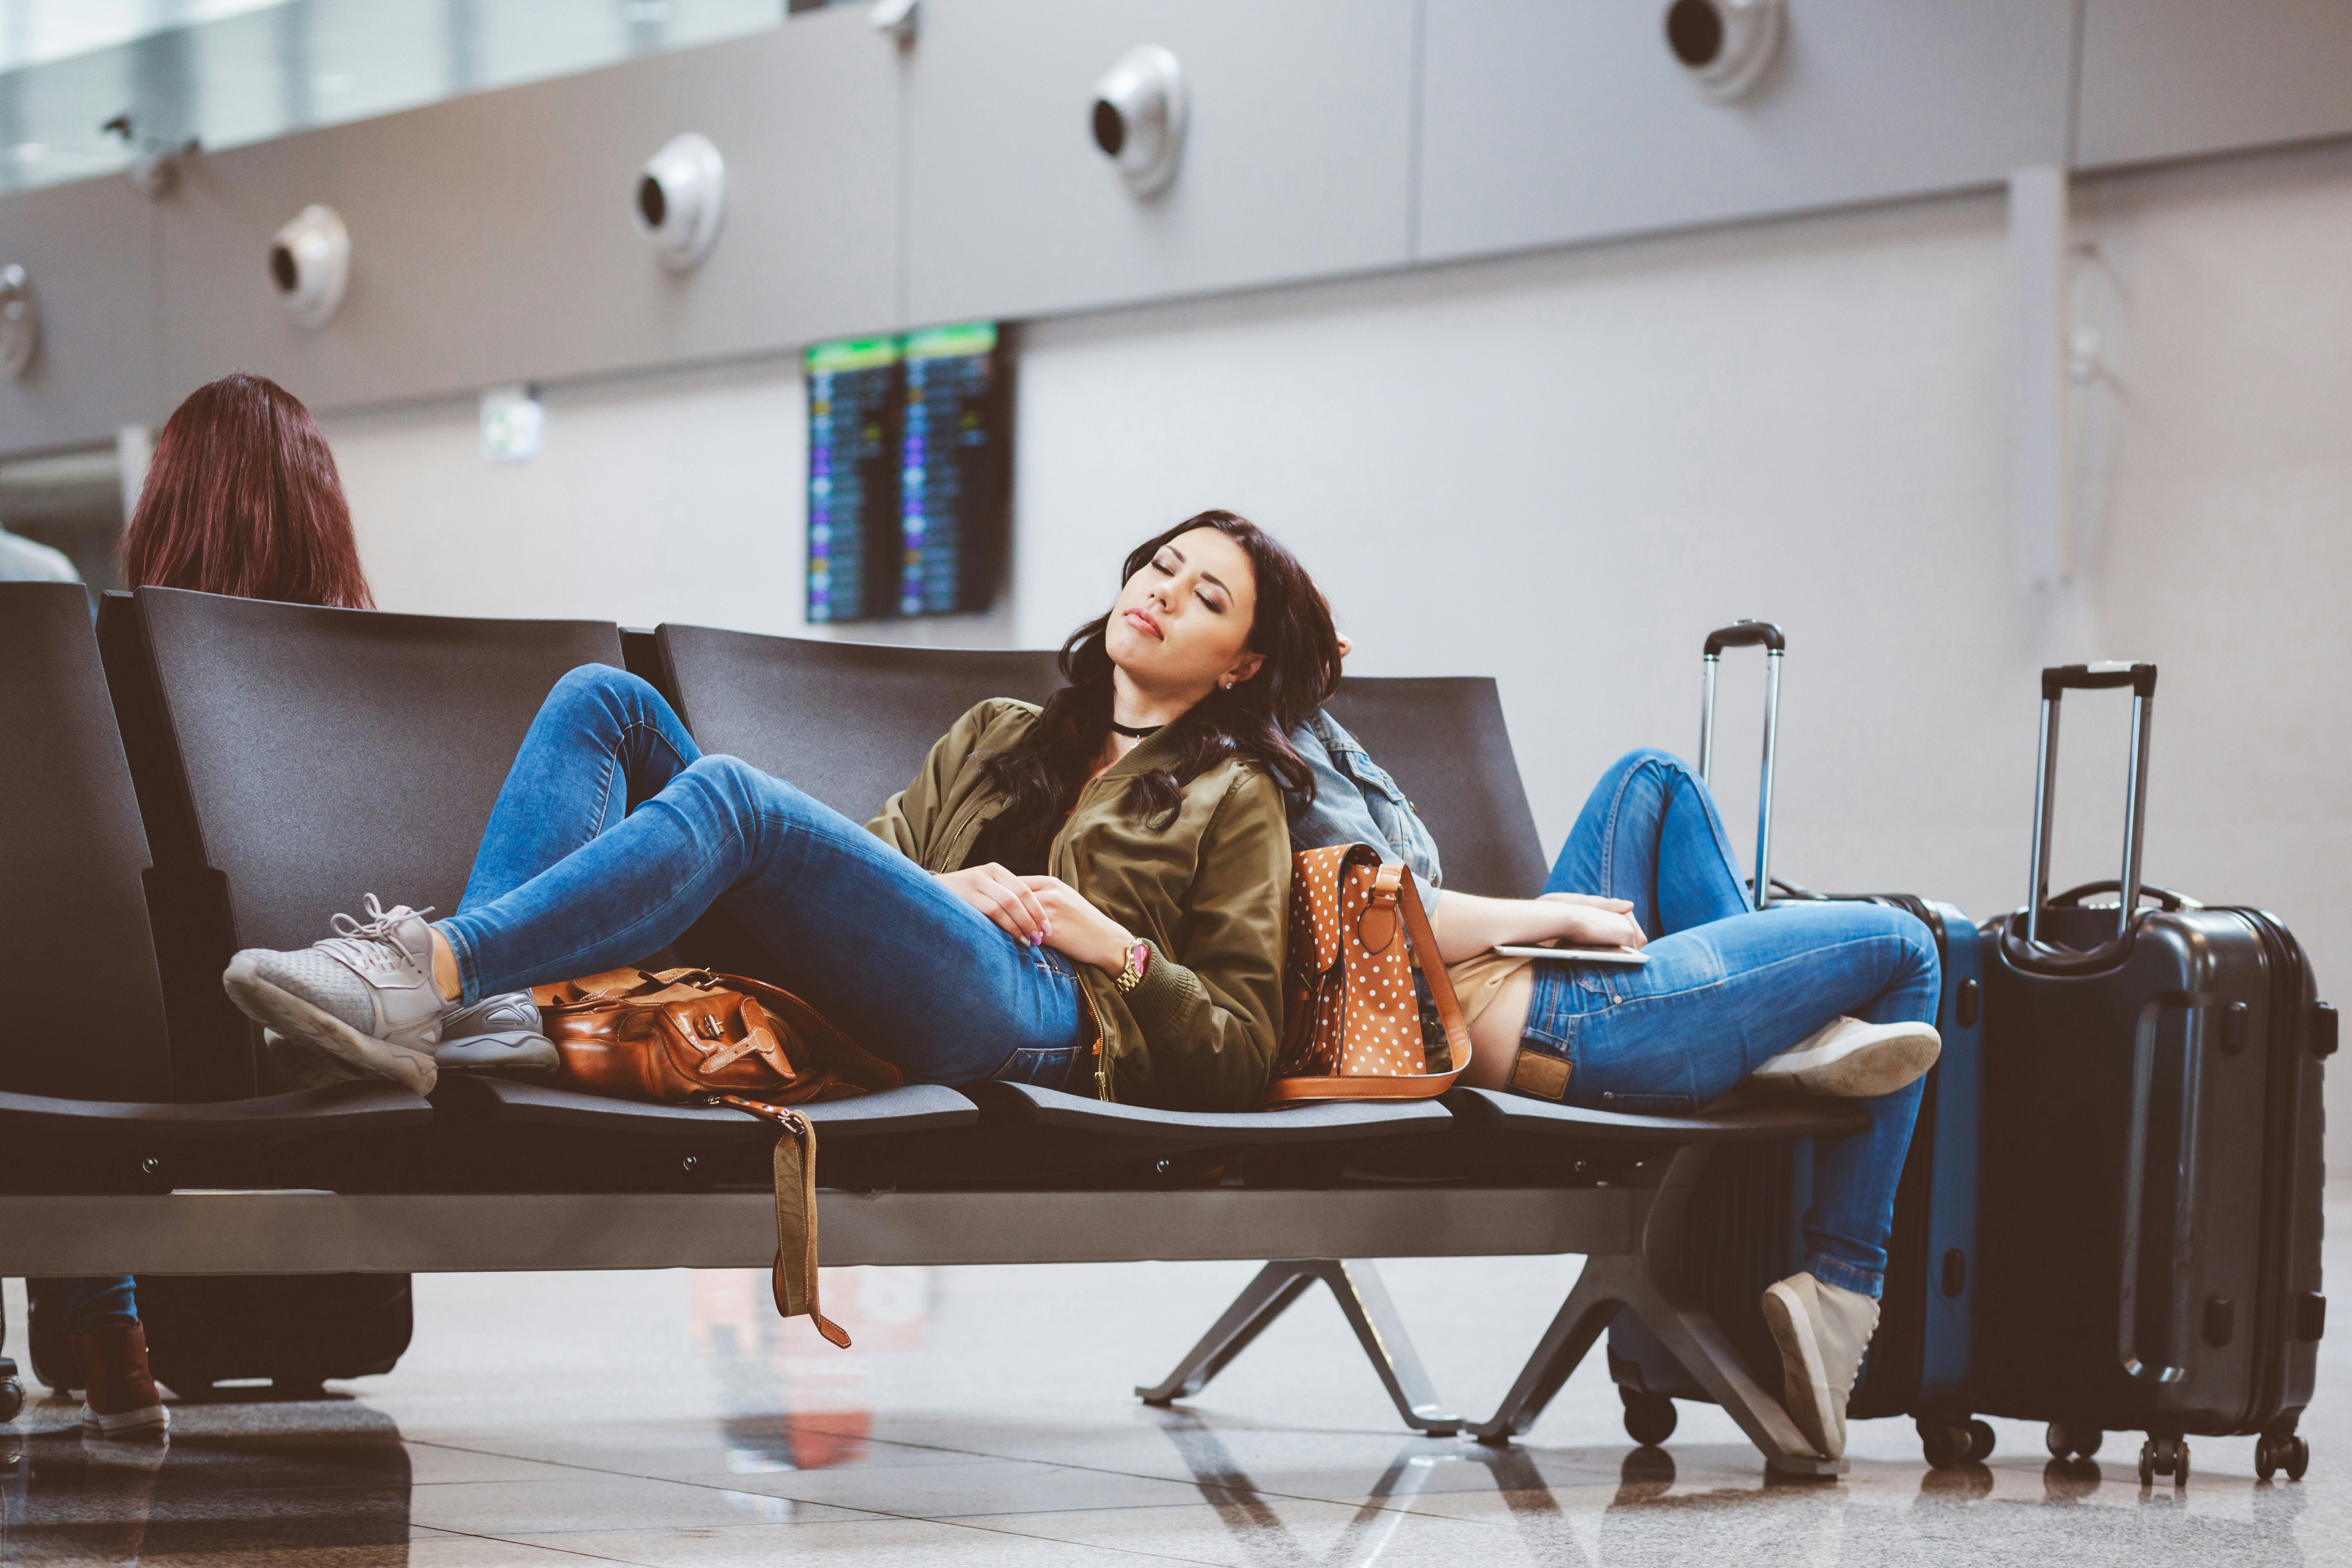 Two female travellers nap on a bench in an airport, propped up against their bags.